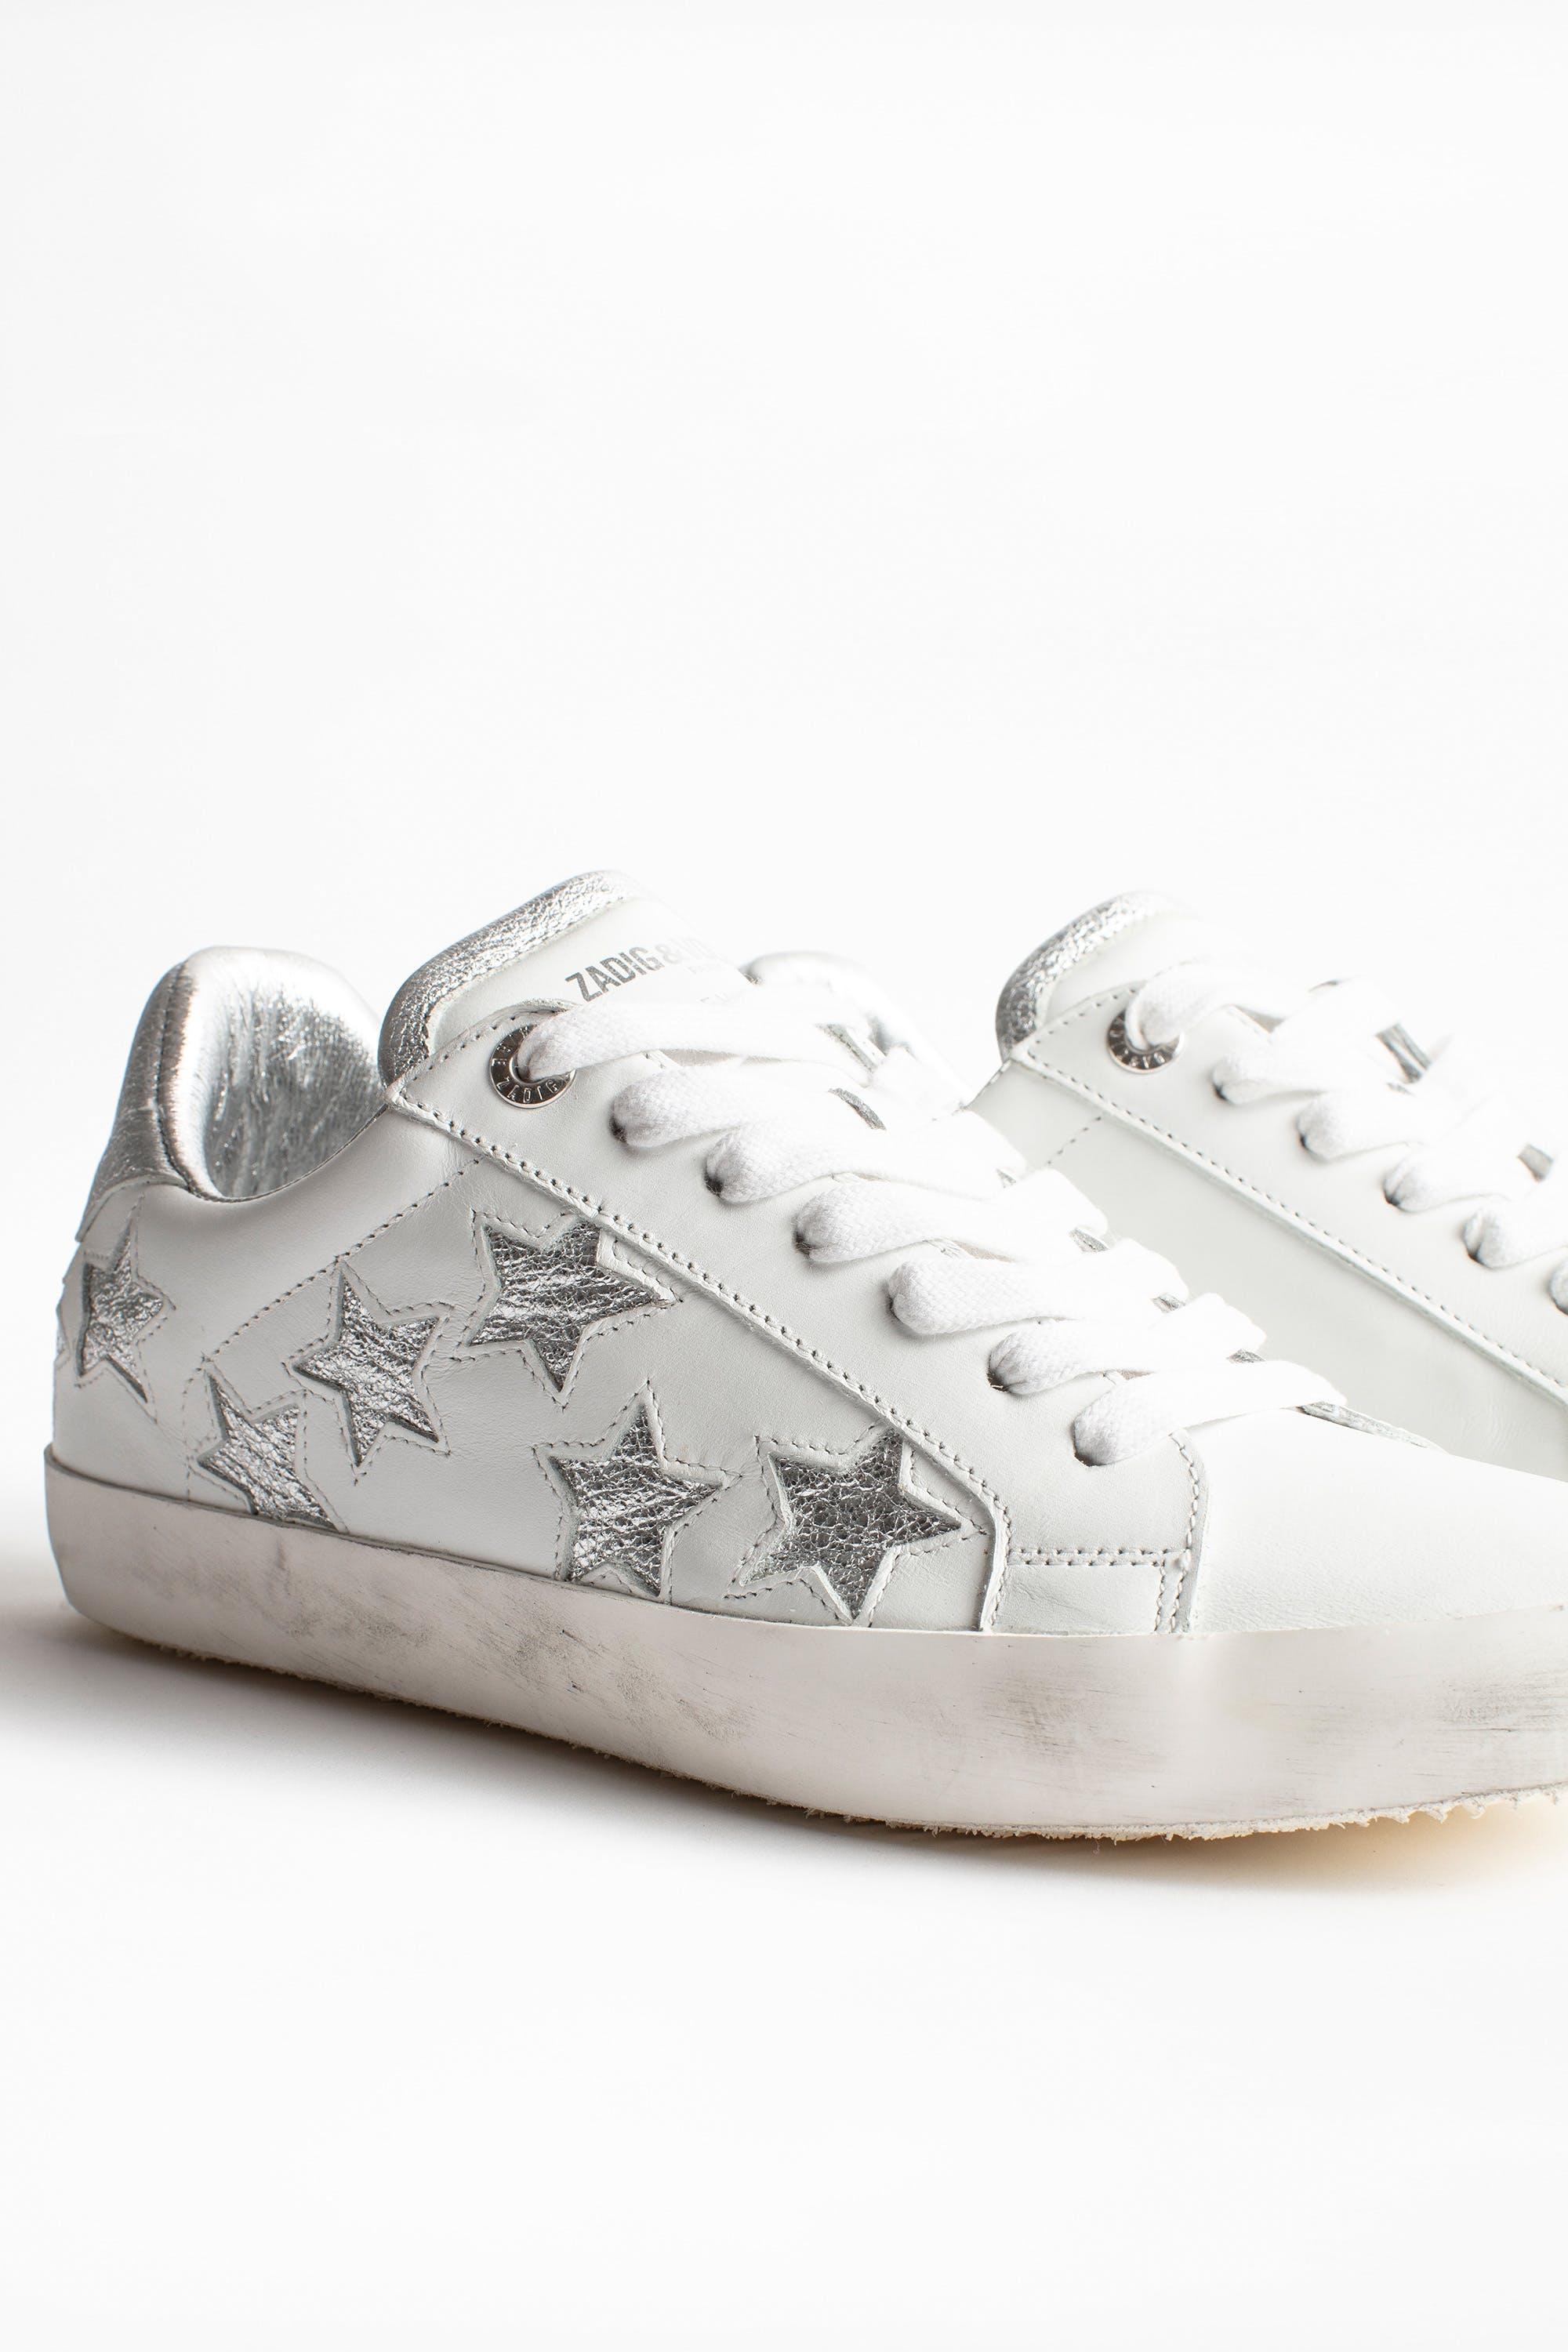 Zadig & Voltaire Leather Zv1747 Stars Metallic Sneakers in White - Lyst